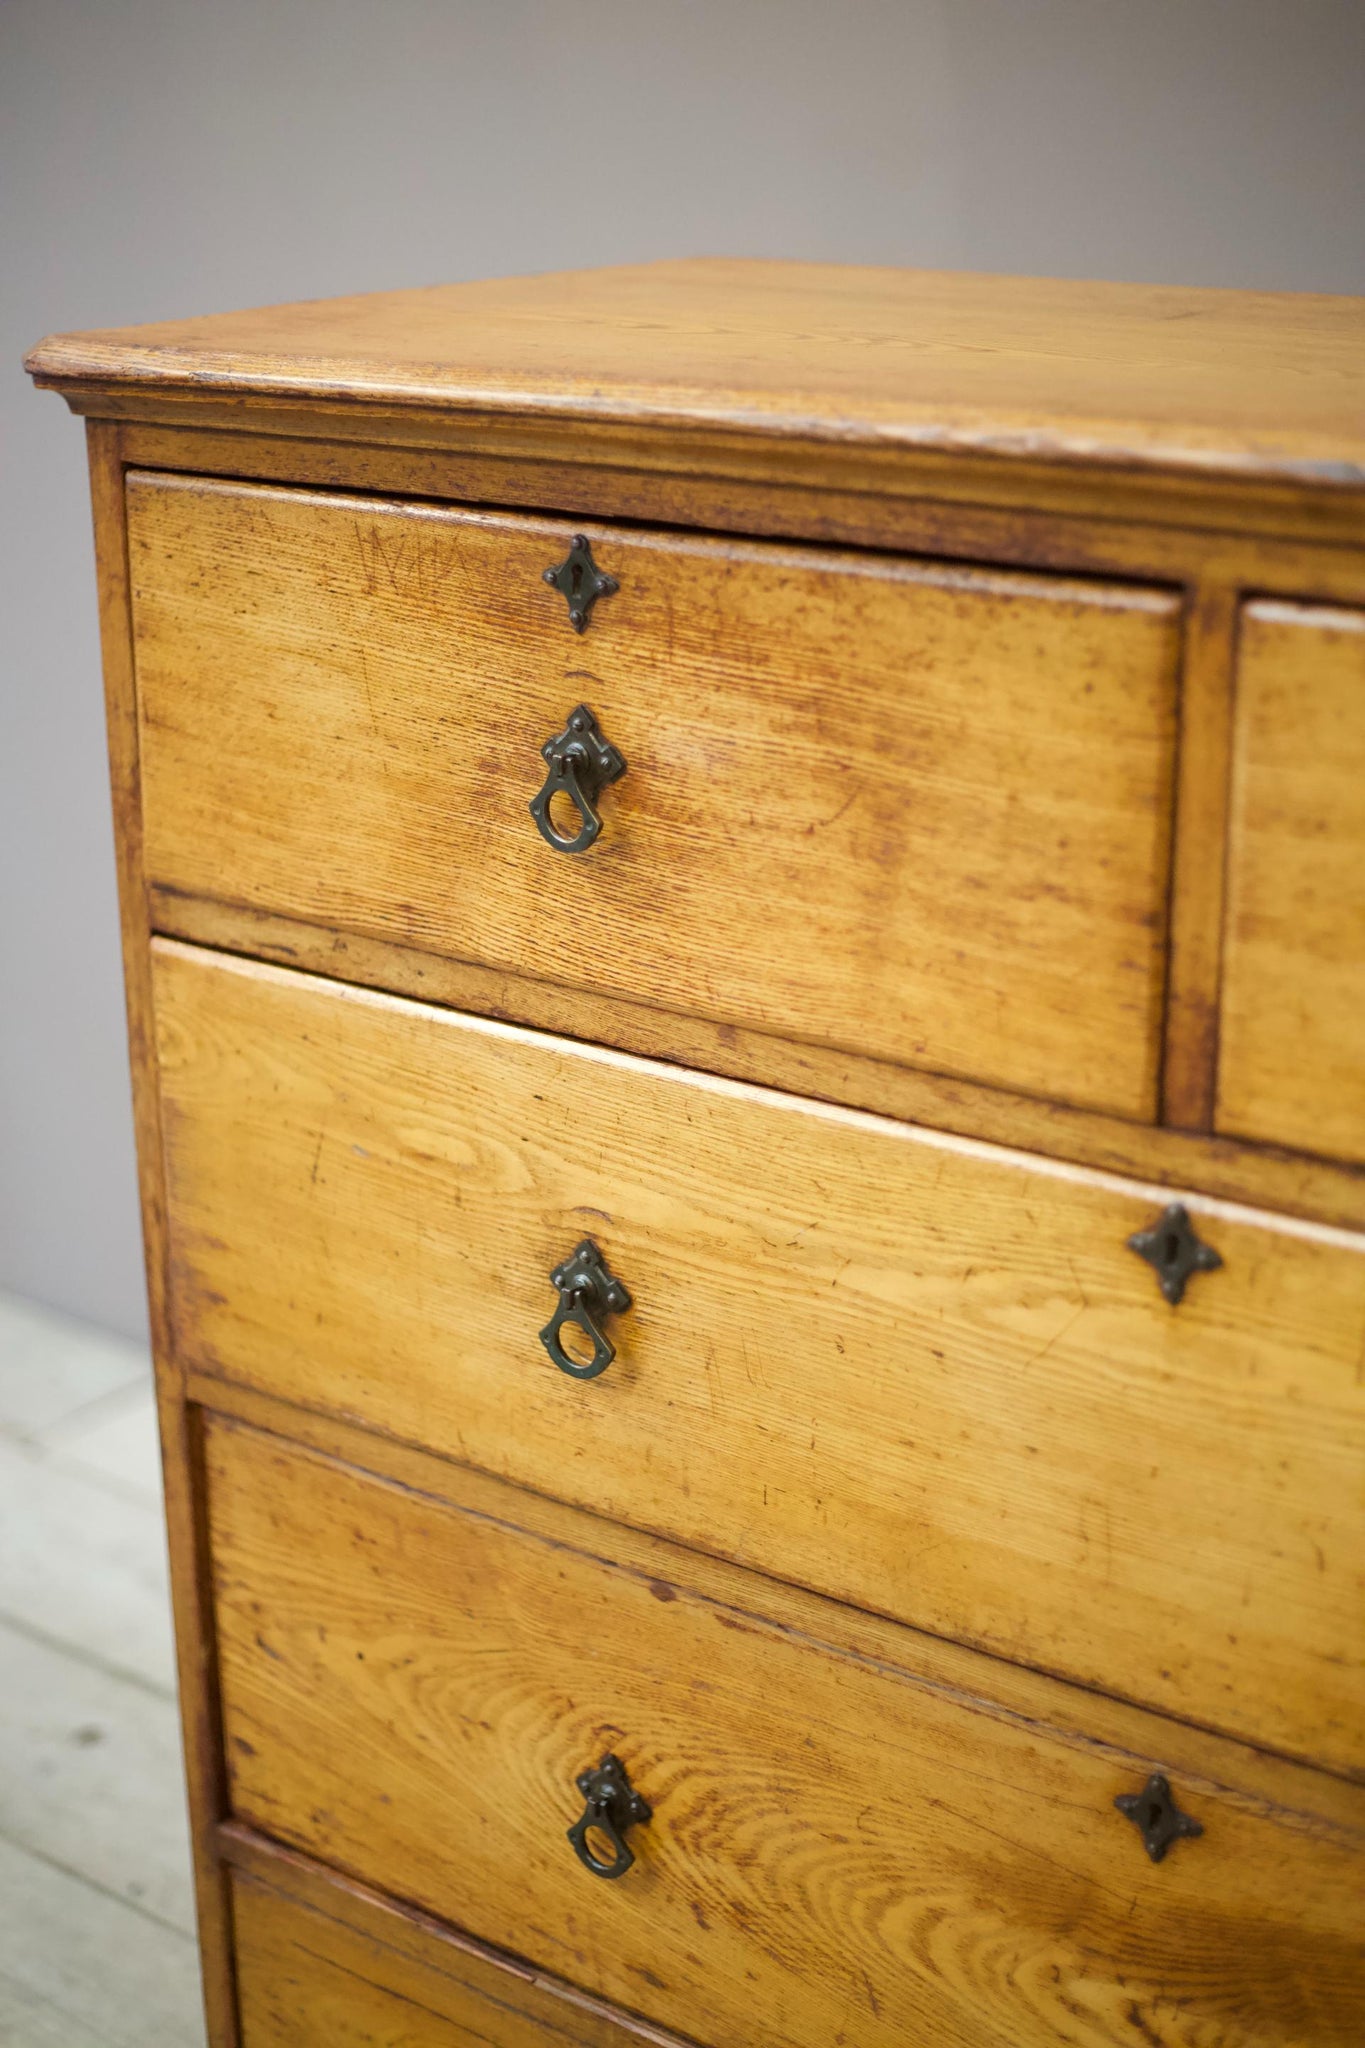 19th century Ash Aesthetic movement chest of drawers